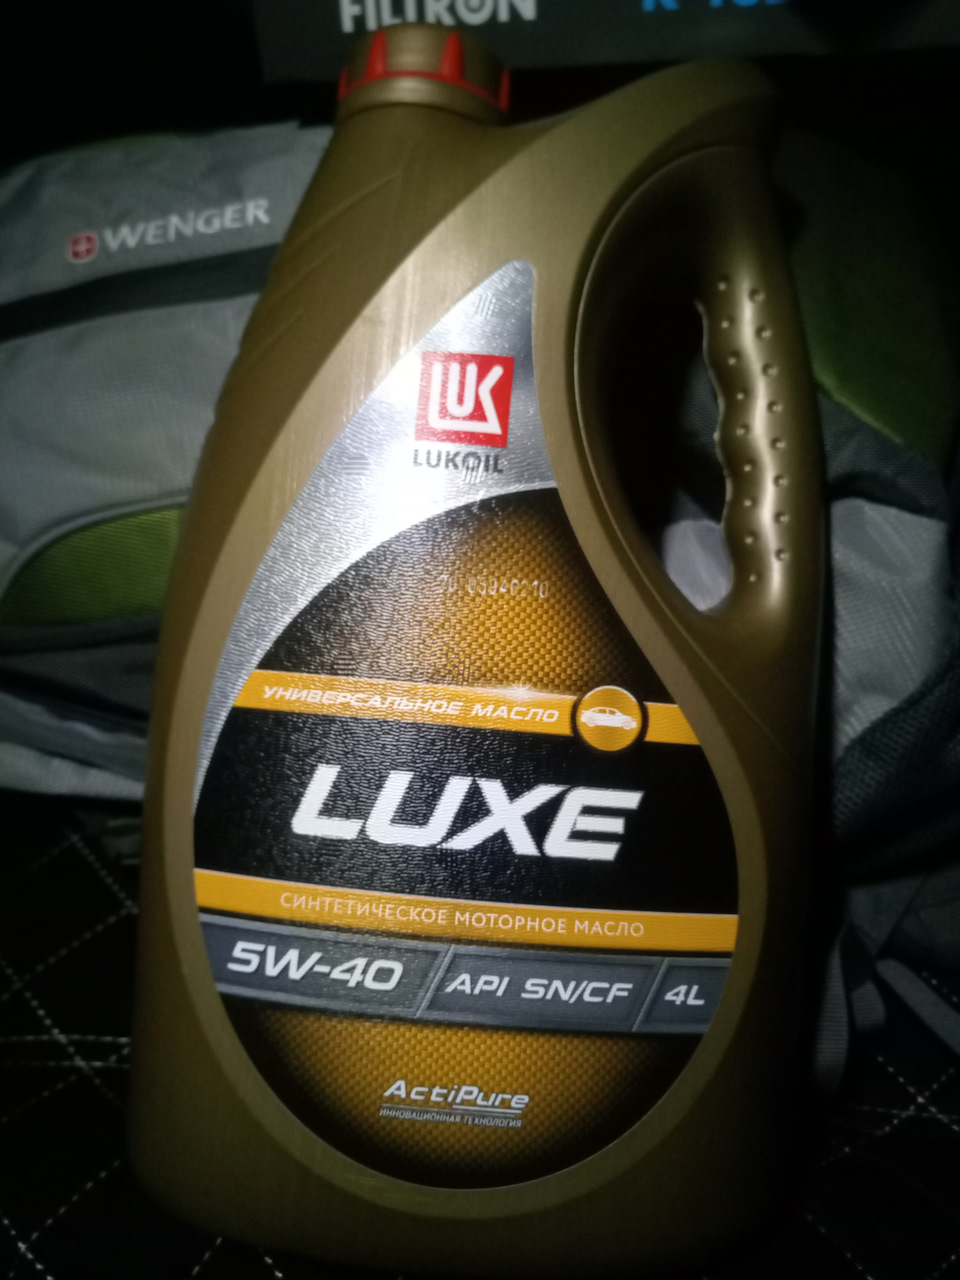 Масло лукойл 5w40 sn cf. Лукойл Luxe 5w-40 синтетика. Масло Лукойл SN CF 5w40. Lukoil Luxe Synthetic 5w-40, API SN/CF. Лукойл Люкс 5w40 синтетика.